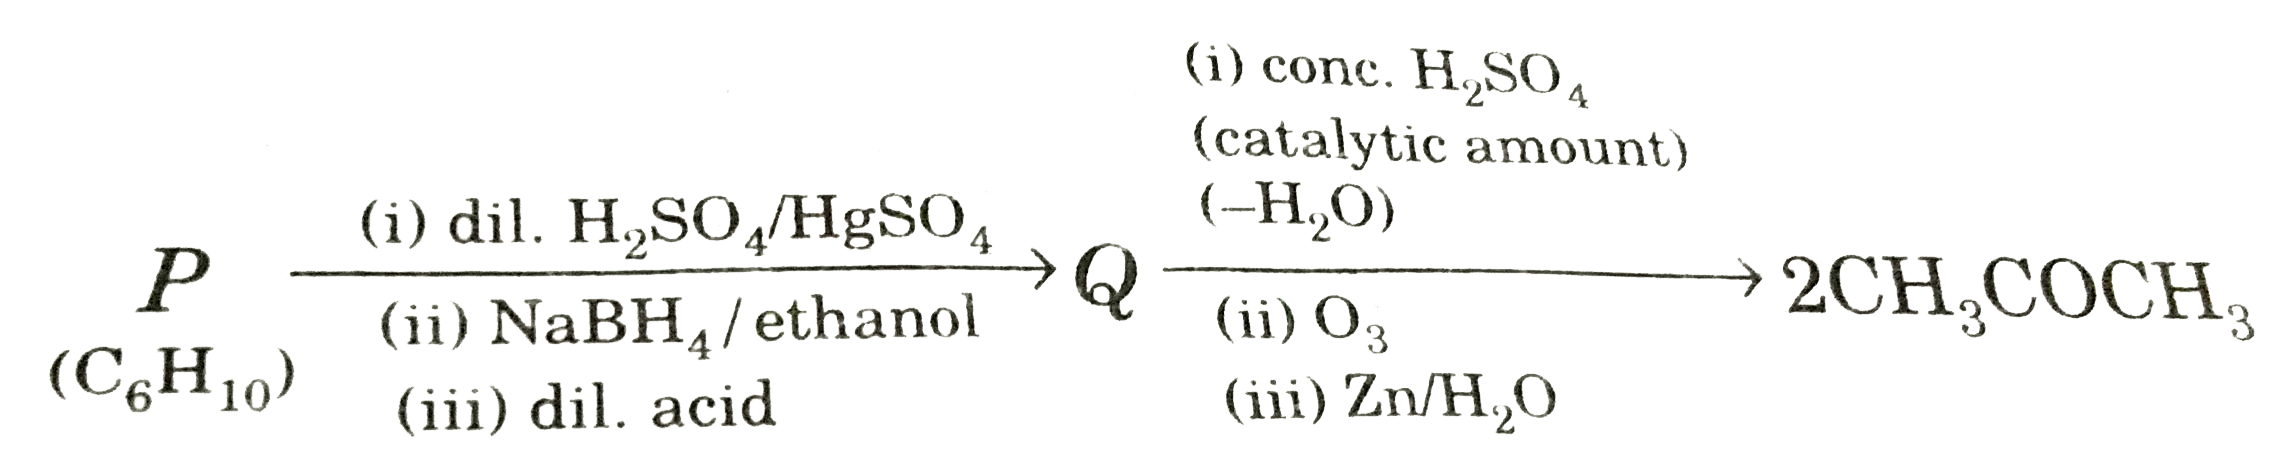 An acyclic hydrocarbon P,having molecular formula C(6)H(10)' gave acetone as the only organic product through the  following sequence  of reactions, in which Q is an intermediate organic compound      The structure of the compound P is :